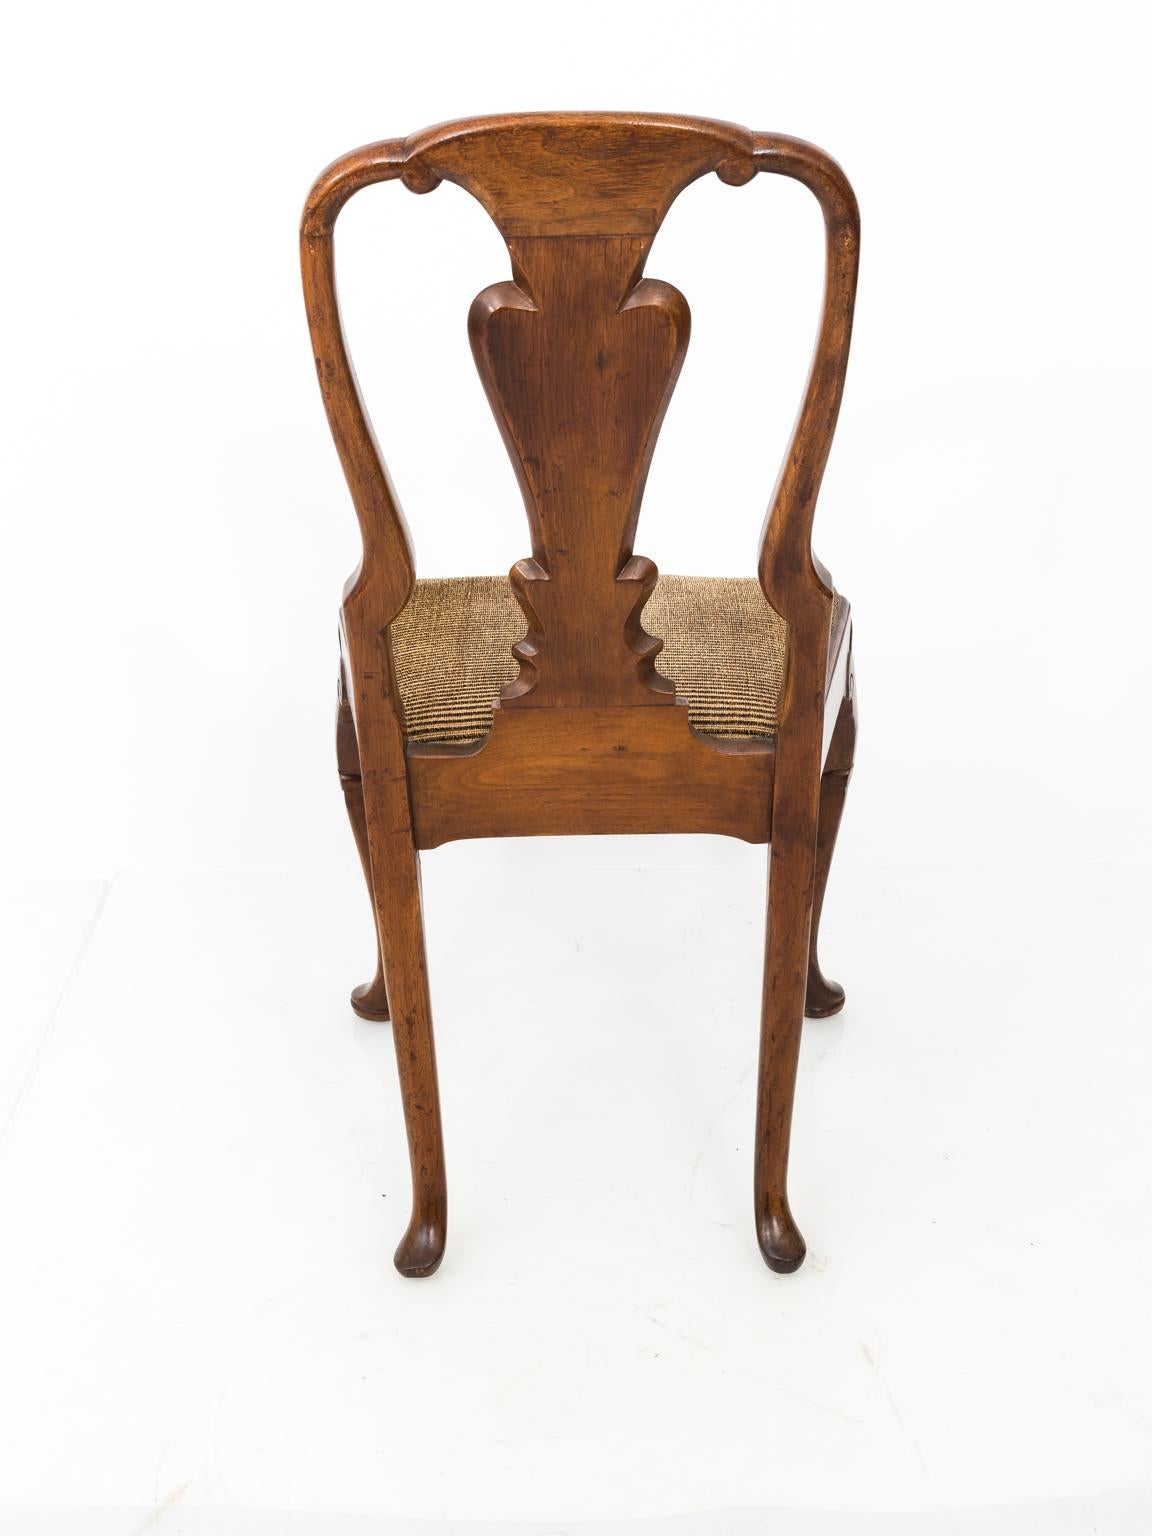 Circa early 19th century pair of English Queen Anne side chairs with upholstered seat and pad feet. The chairs also feature a vase-shaped back splat and cabriole legs with carved knees. Please note of wear with age including indents in the wood. 